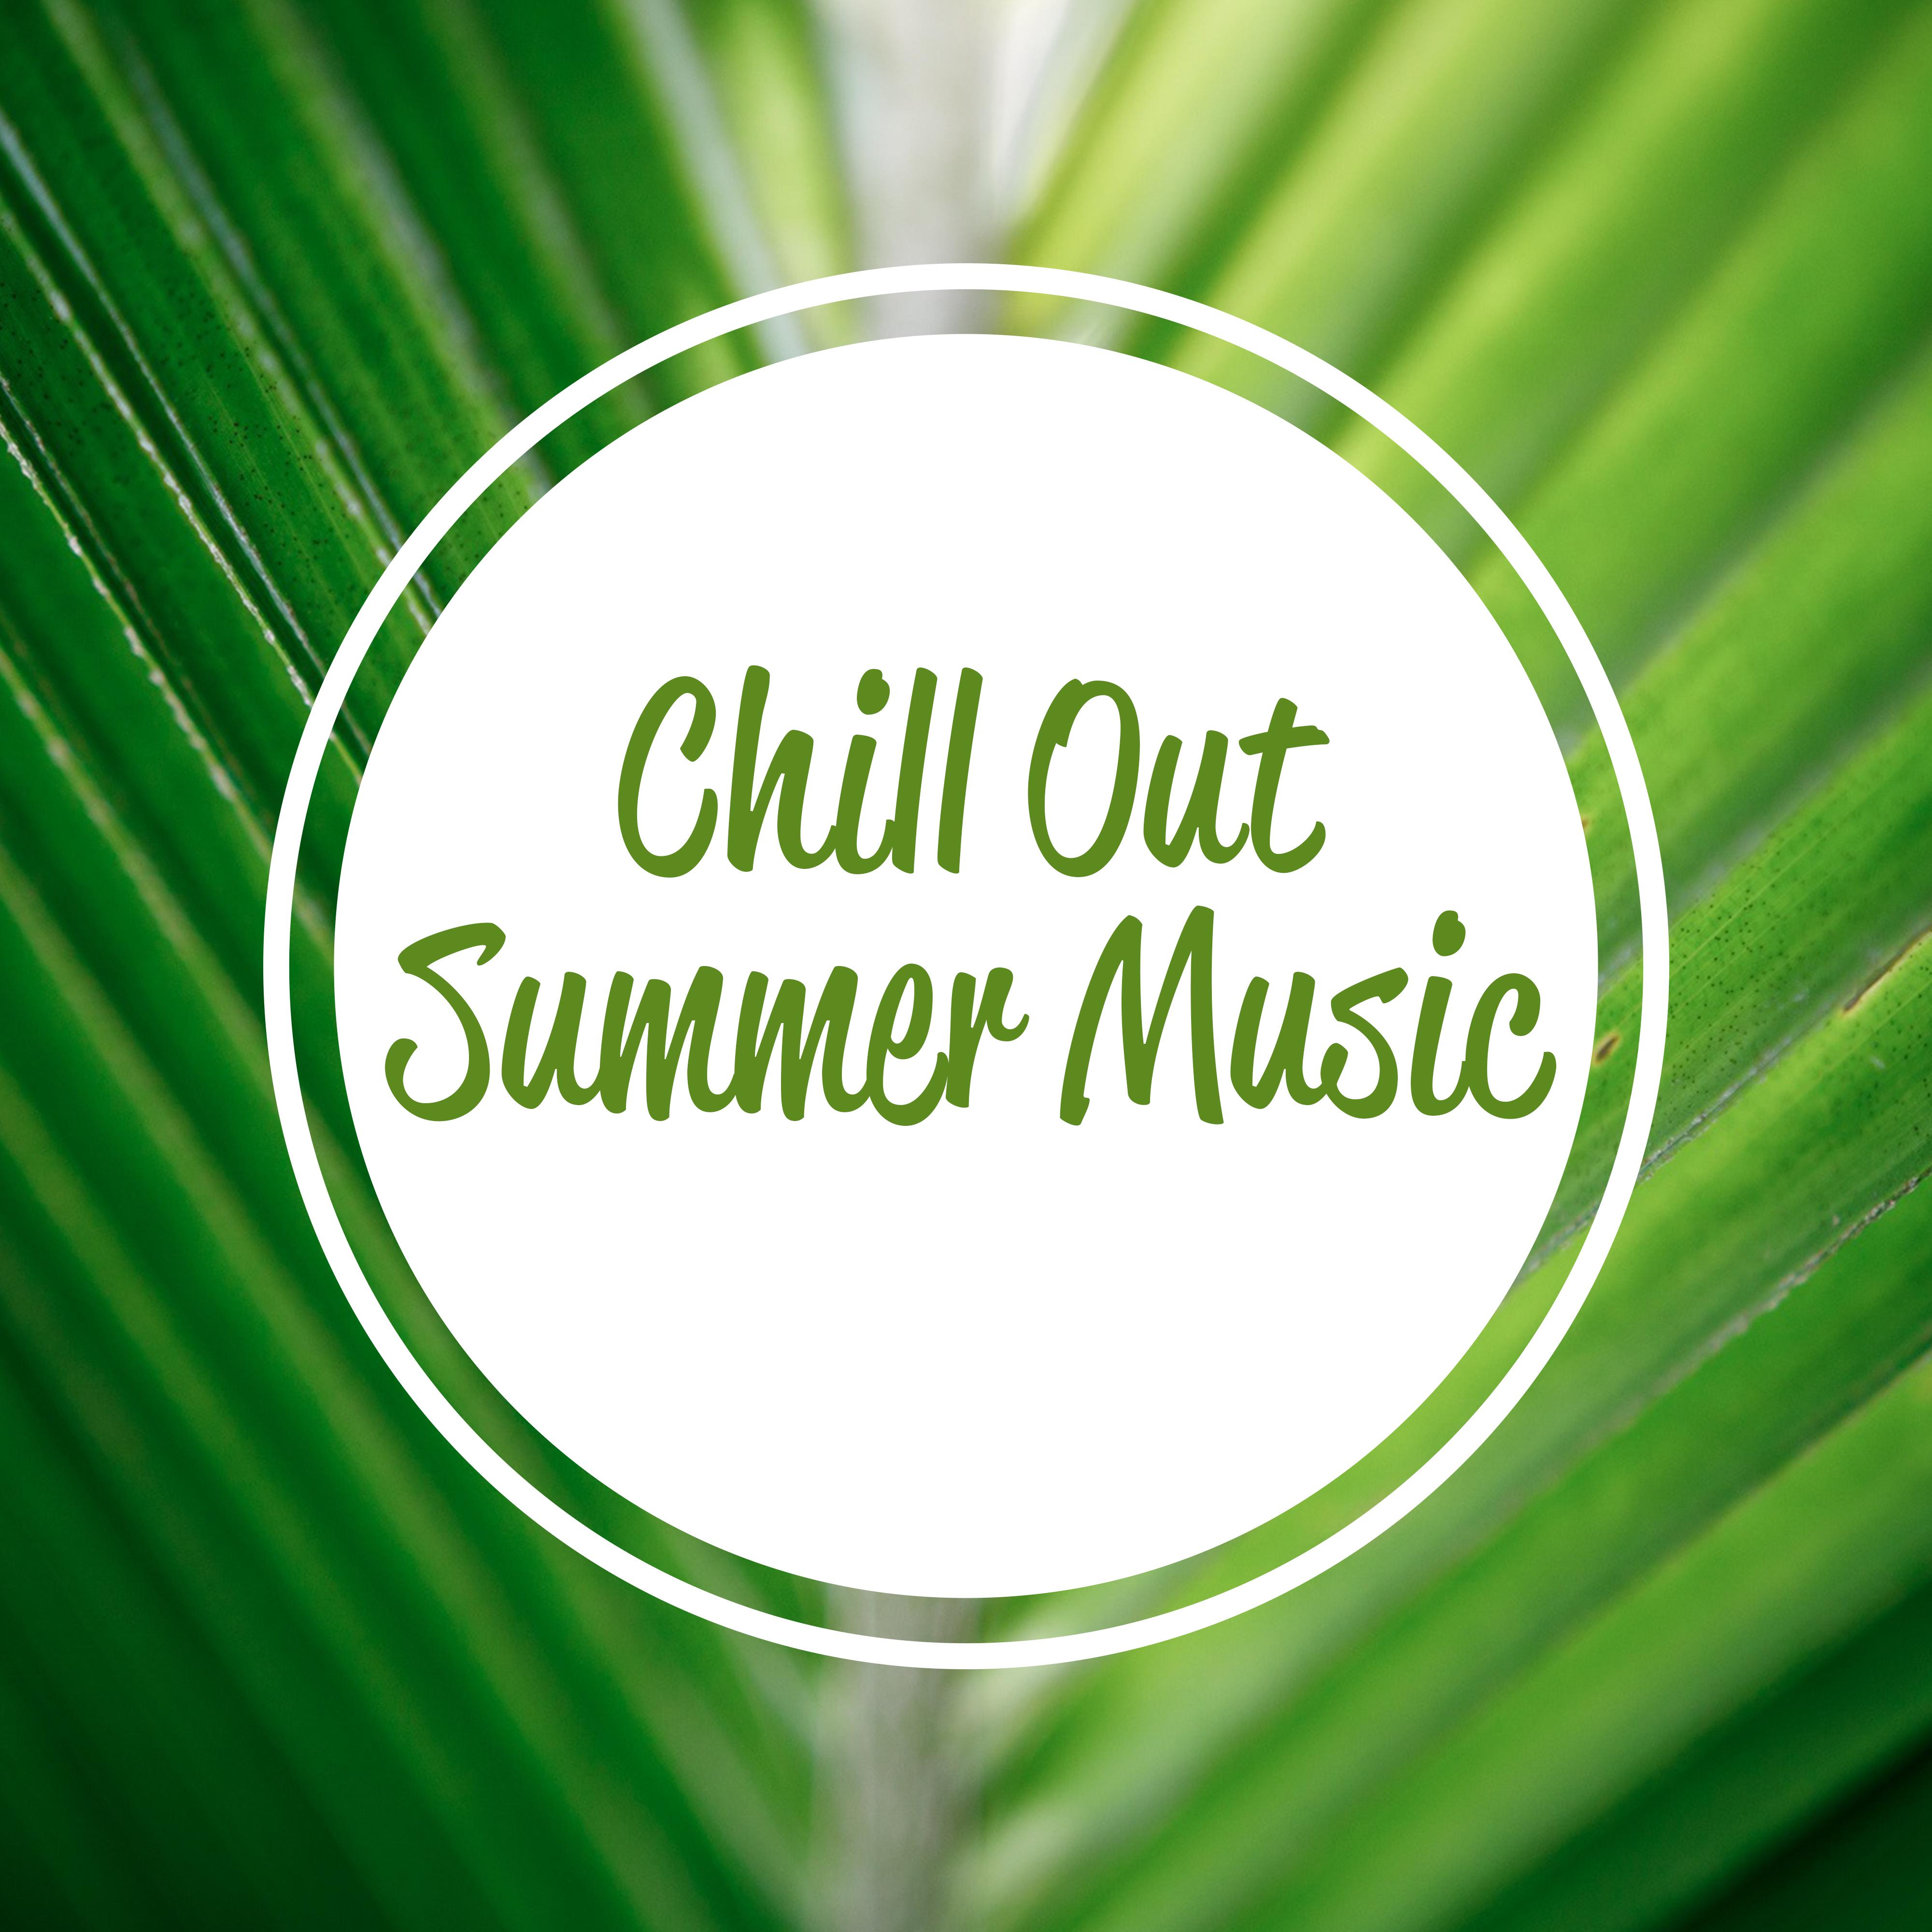 Chill Out Summer Music  Calm Down  Relax, Sounds to Chillout, Rest on the Beach, Tropical Island